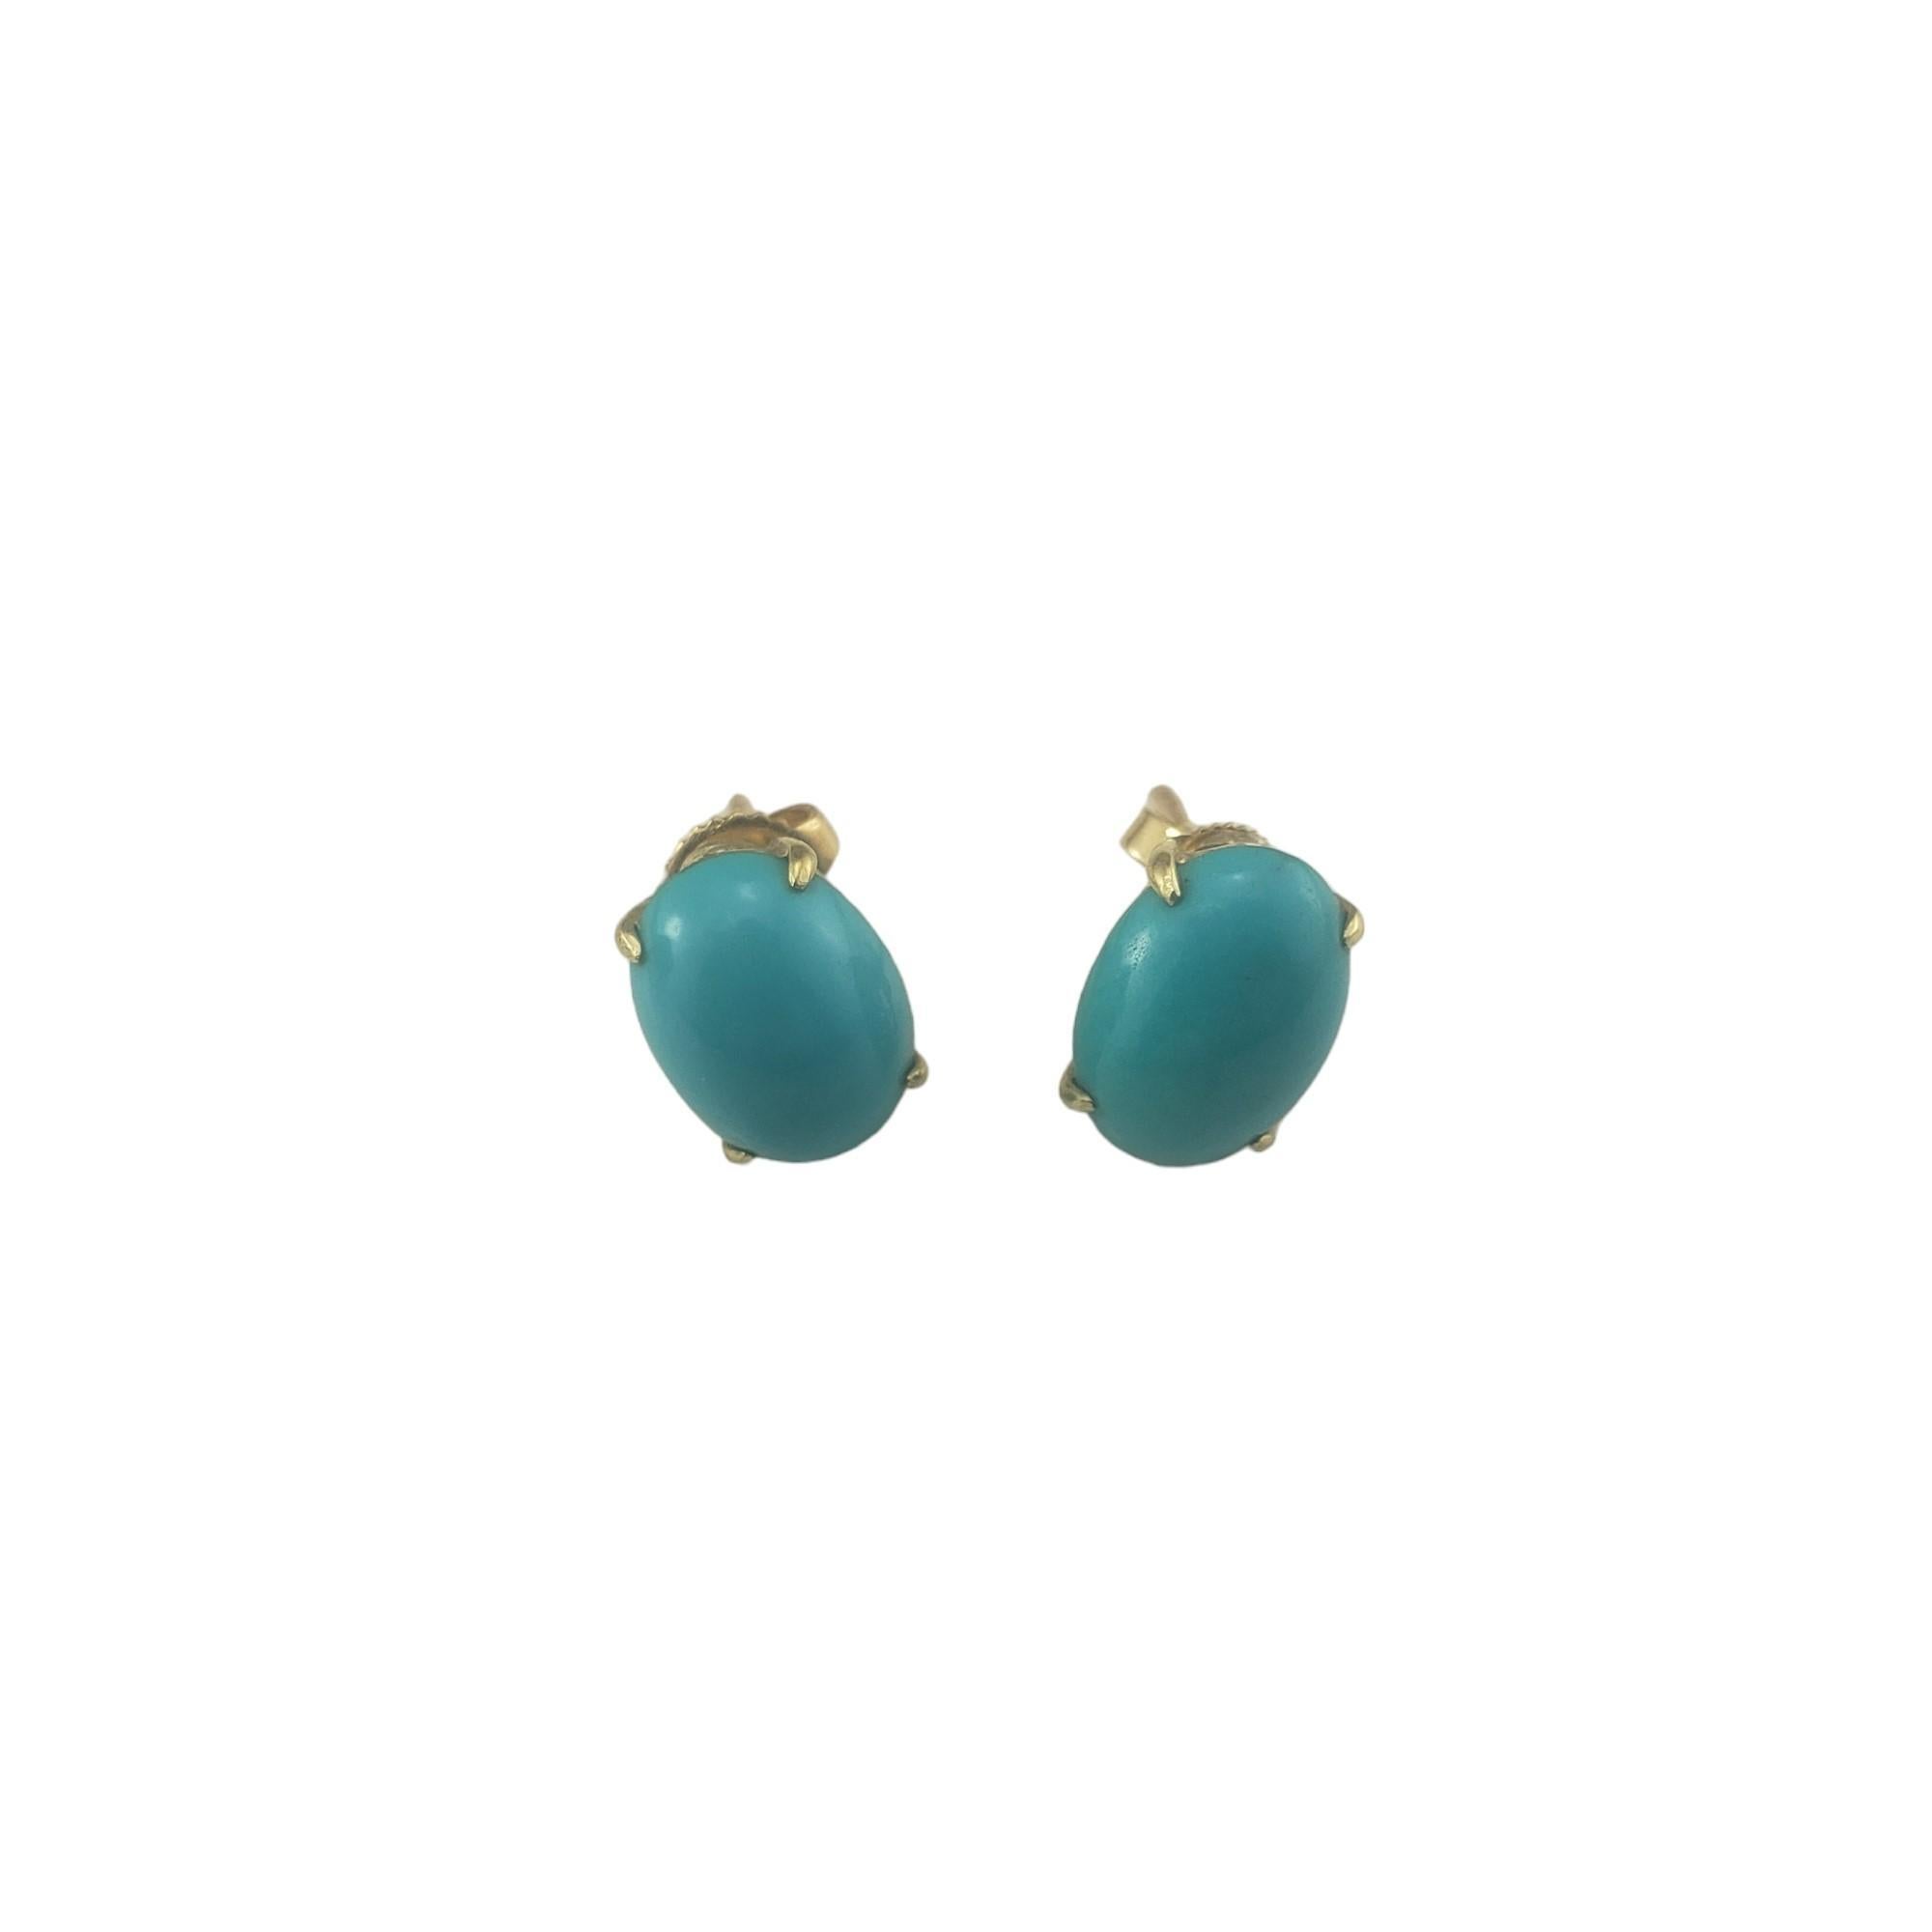 Vintage 14K Yellow Gold Turquoise Stud Earrings-

These elegant earrings each feature one turquoise stone (11 mm x 8 mm) set in classic 14K yellow gold.  Push back closures.

Size: 11 mm x 8 mm

Tested 14K gold.

Weight: 1.8 dwt./ 3.0 gr.

Very good